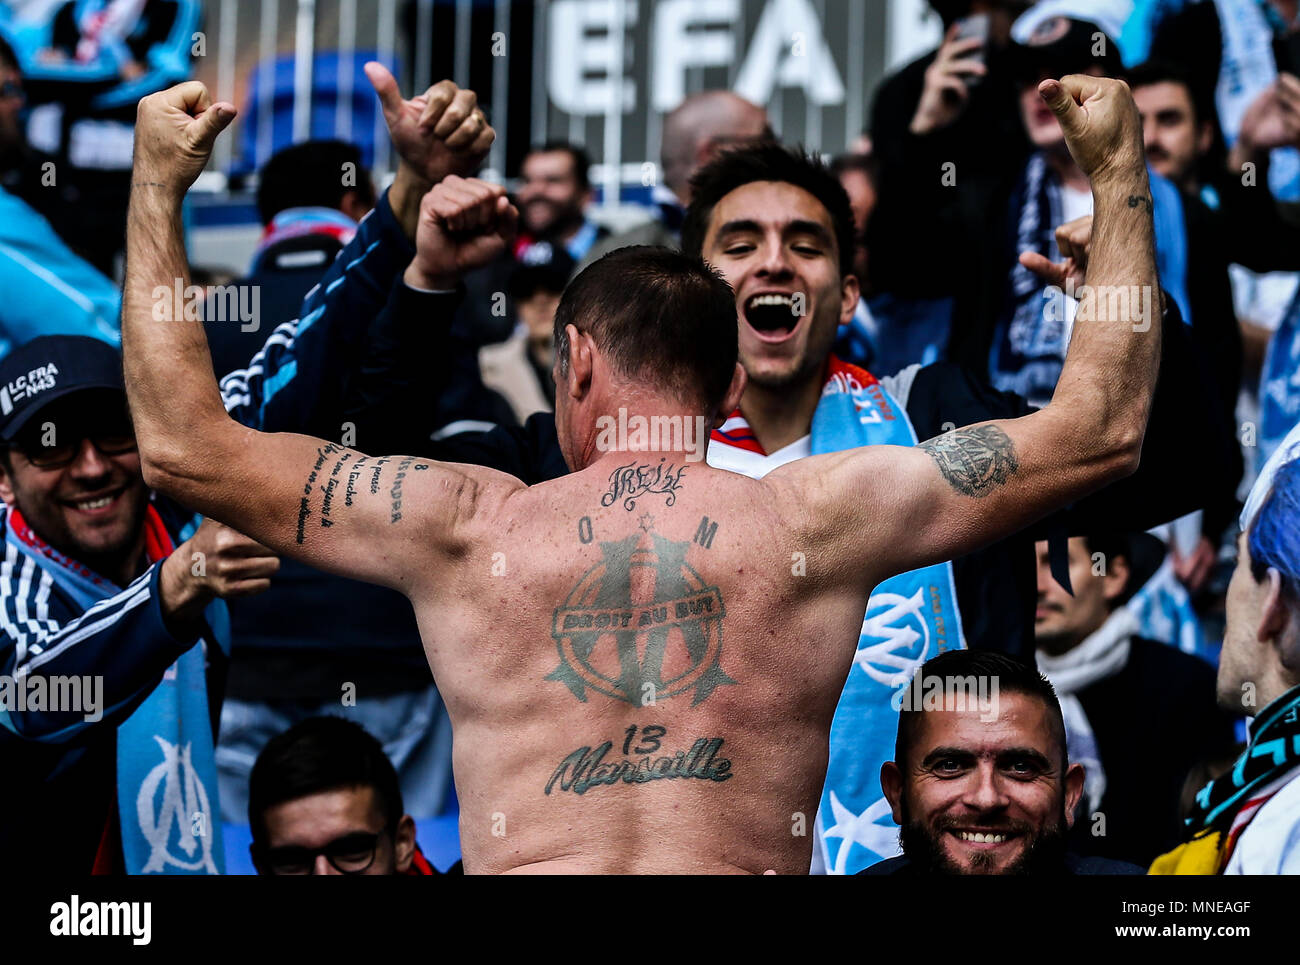 Marseille fans stock photography and - Alamy